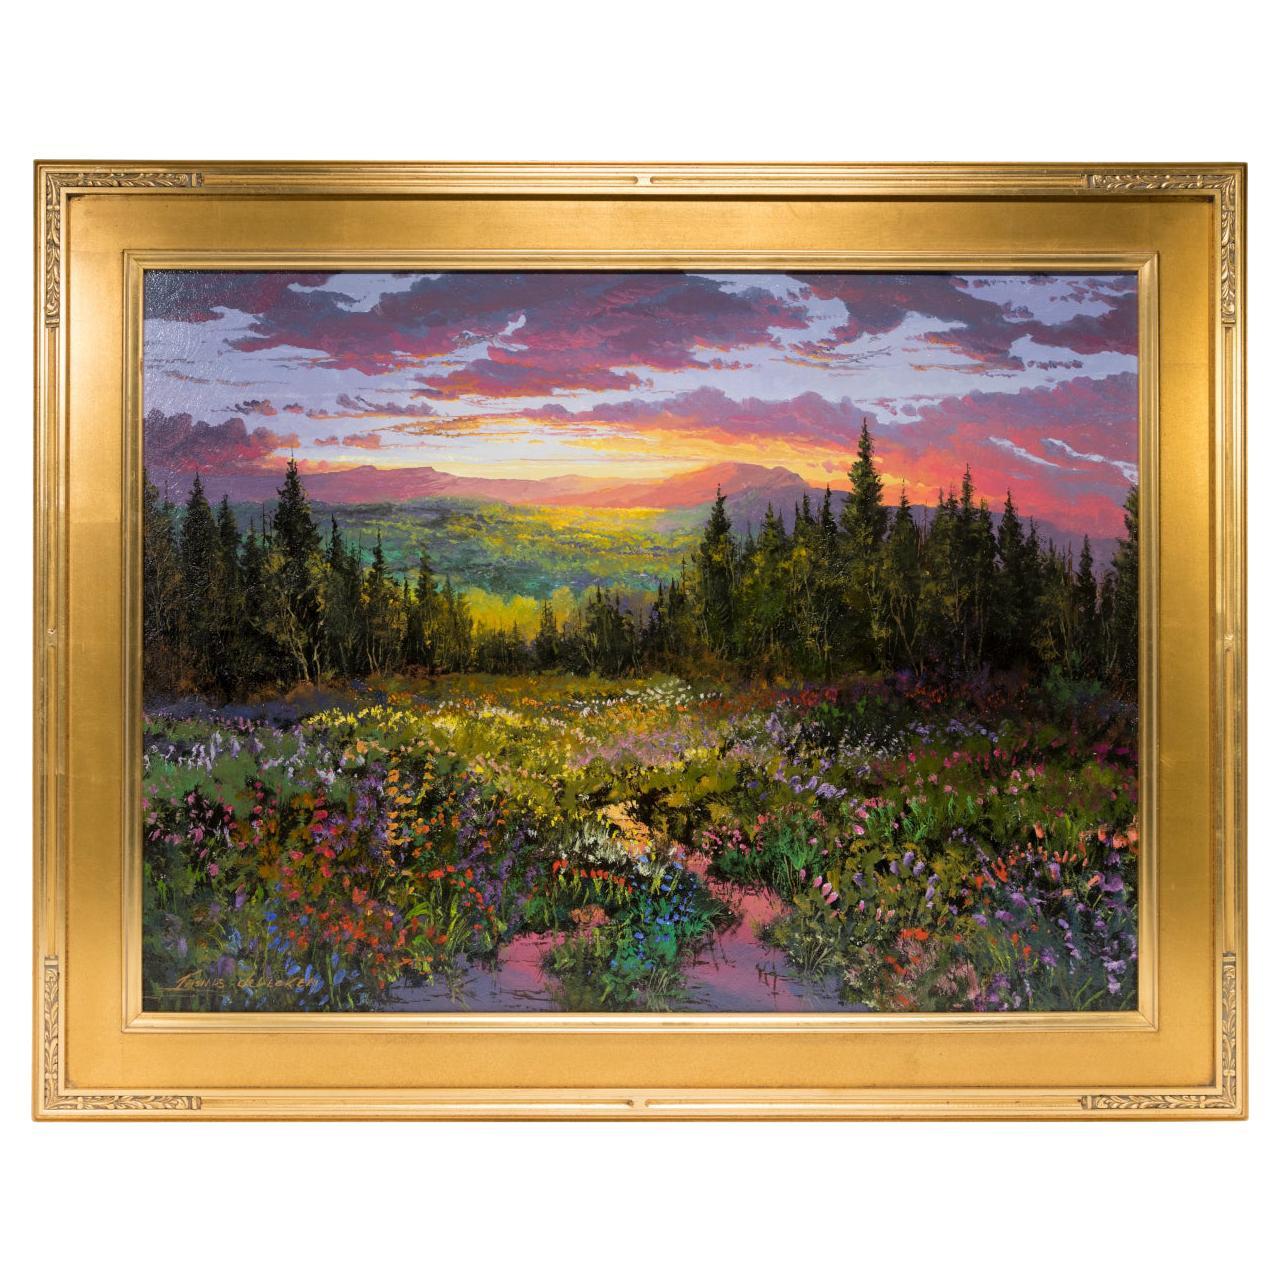 Original Painting "End of a Serene Day by Thomas dedecker